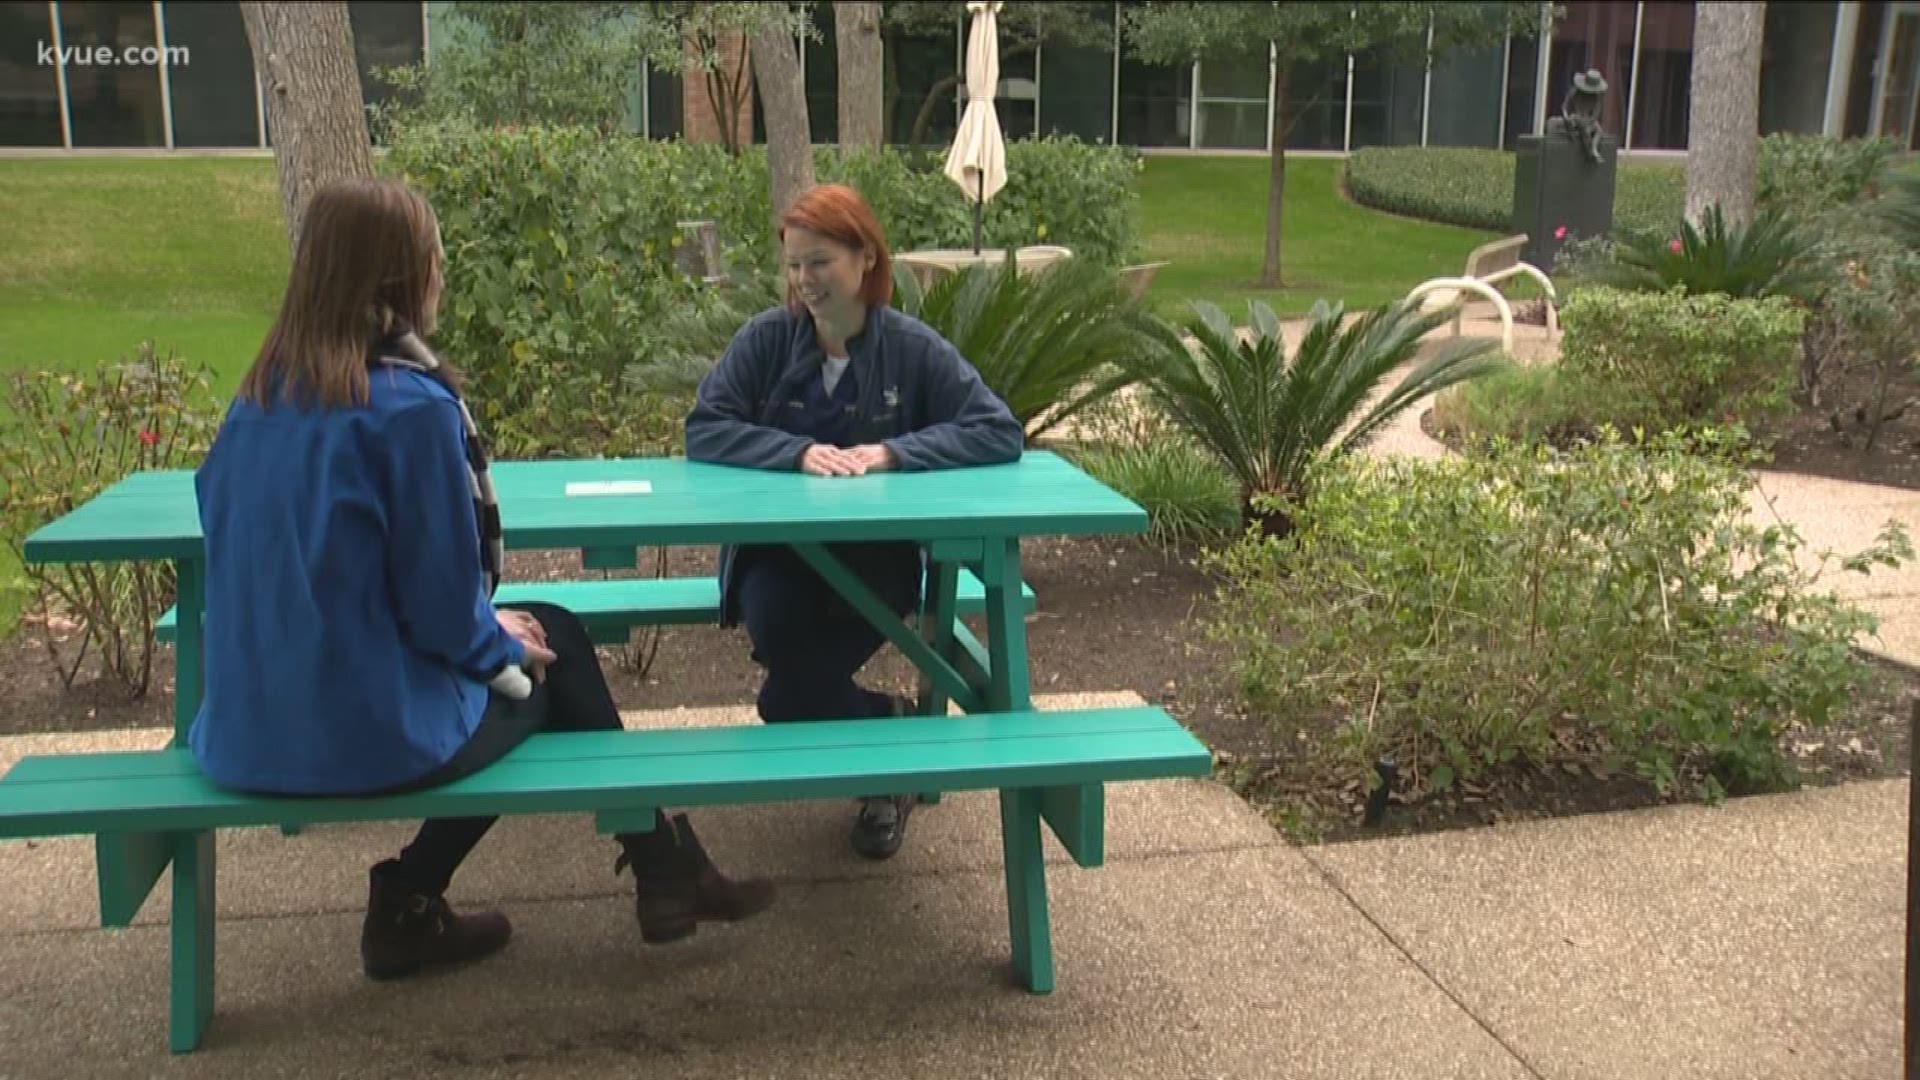 An Austin woman started the "Turquoise Table" movement a few years ago -- and now there are "Turquoise Tables" in all 50 states.